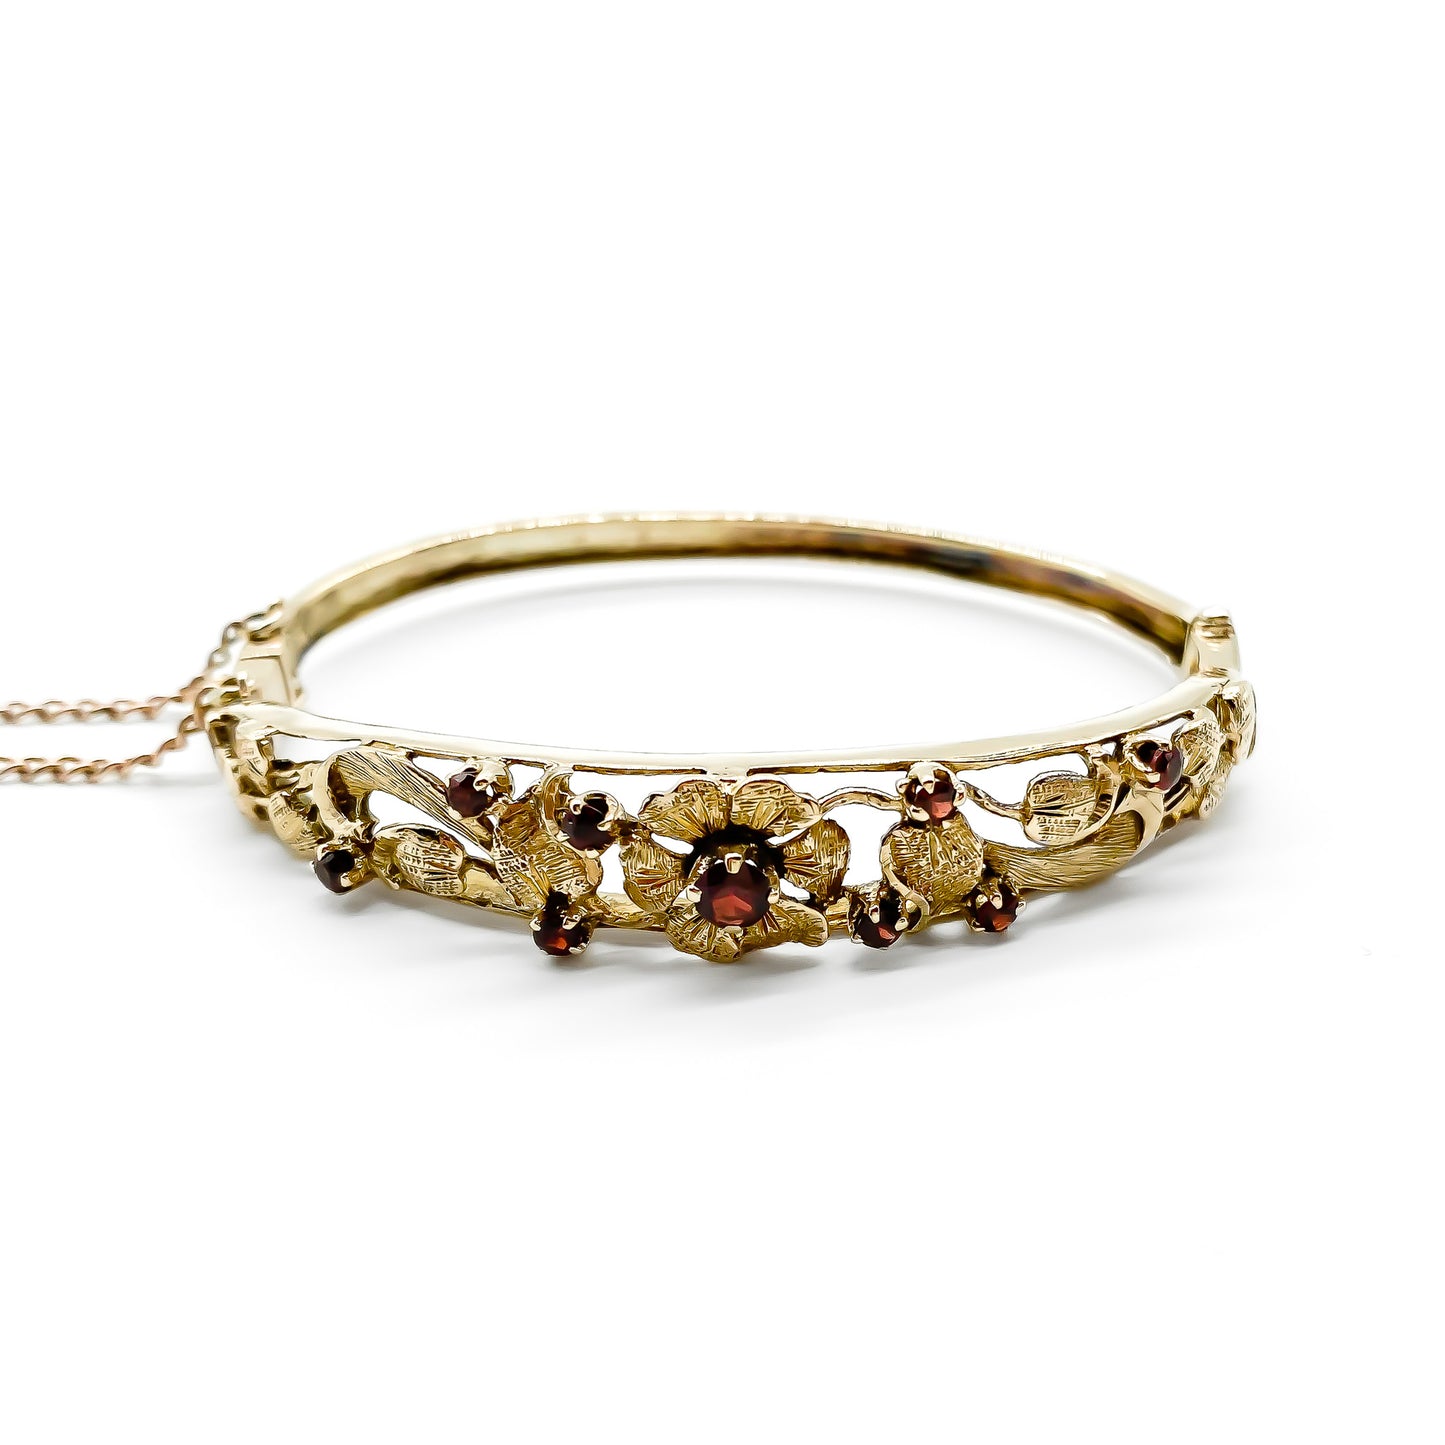 Beautiful 9ct rose gold bangle set with nine faceted garnets in a lovely floral design. Gold safety chain attached.